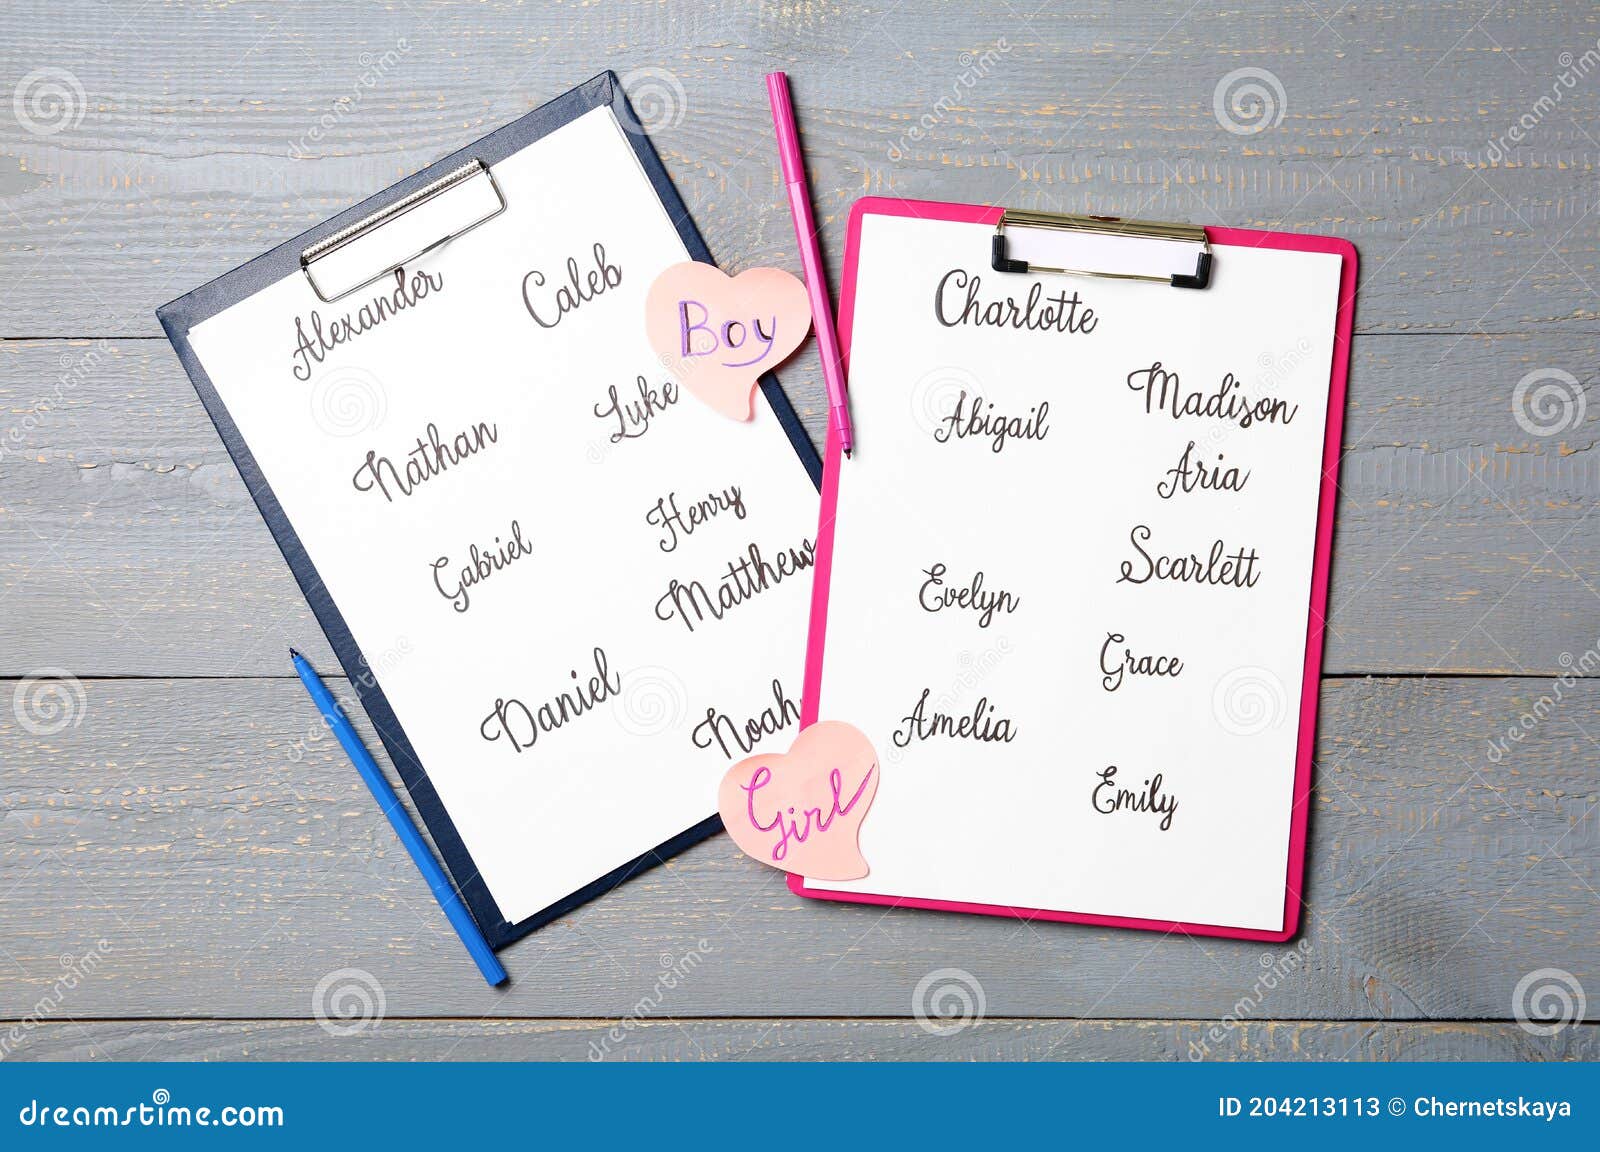 clipboards with different baby names and felt tip pens on grey wooden table, flat lay